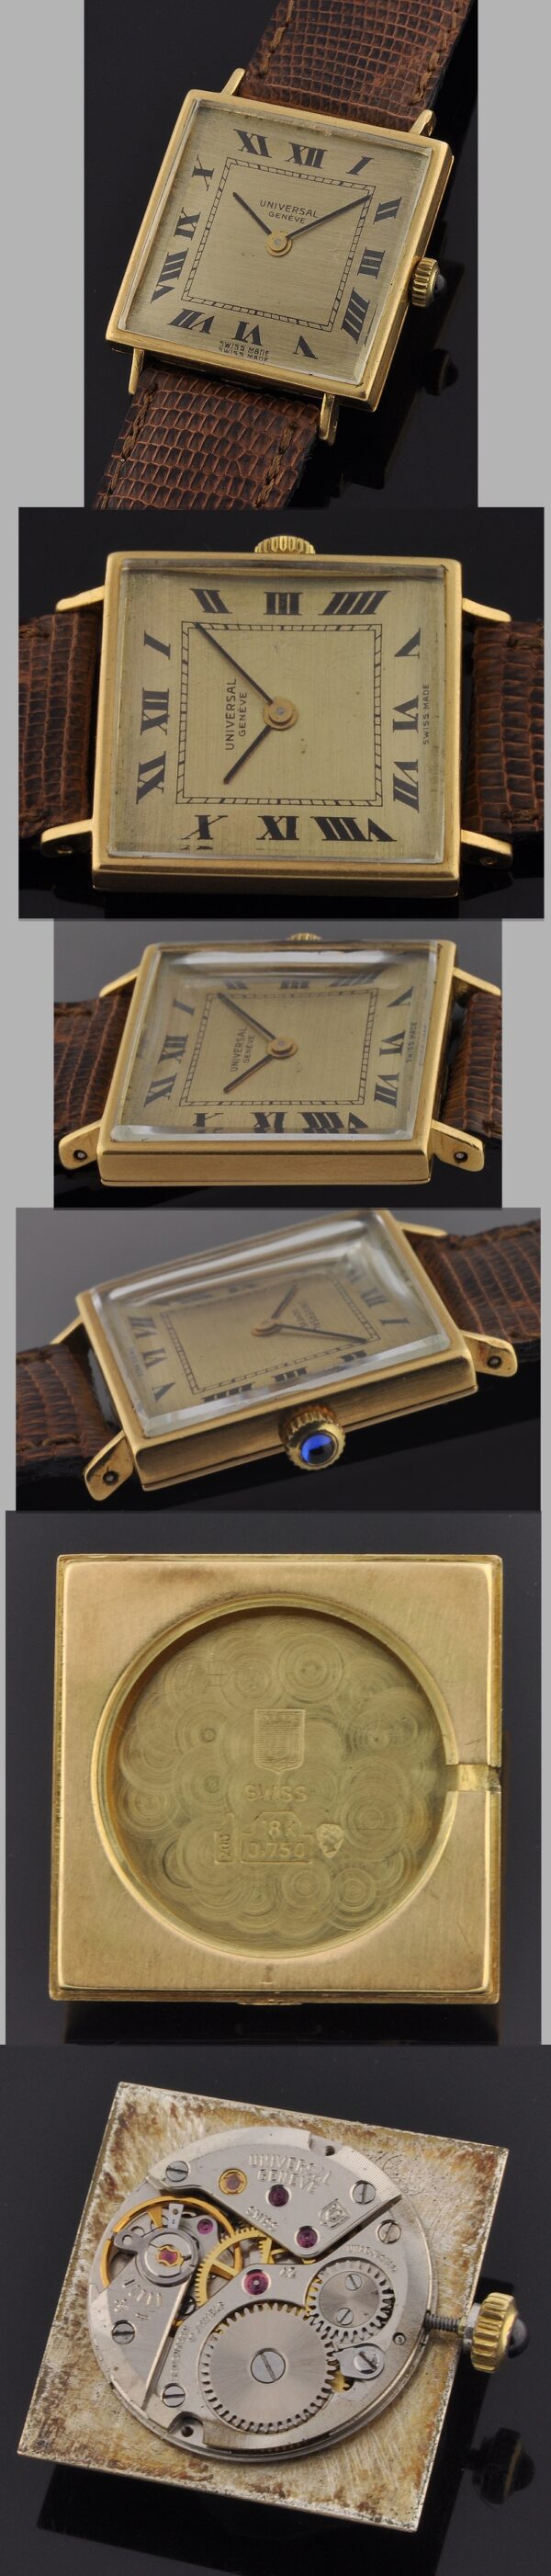 1960s Universal Geneve 18k solid-yellow-gold men's watch with original square-shaped case measuring 25.5mm wide and 6mm thick.